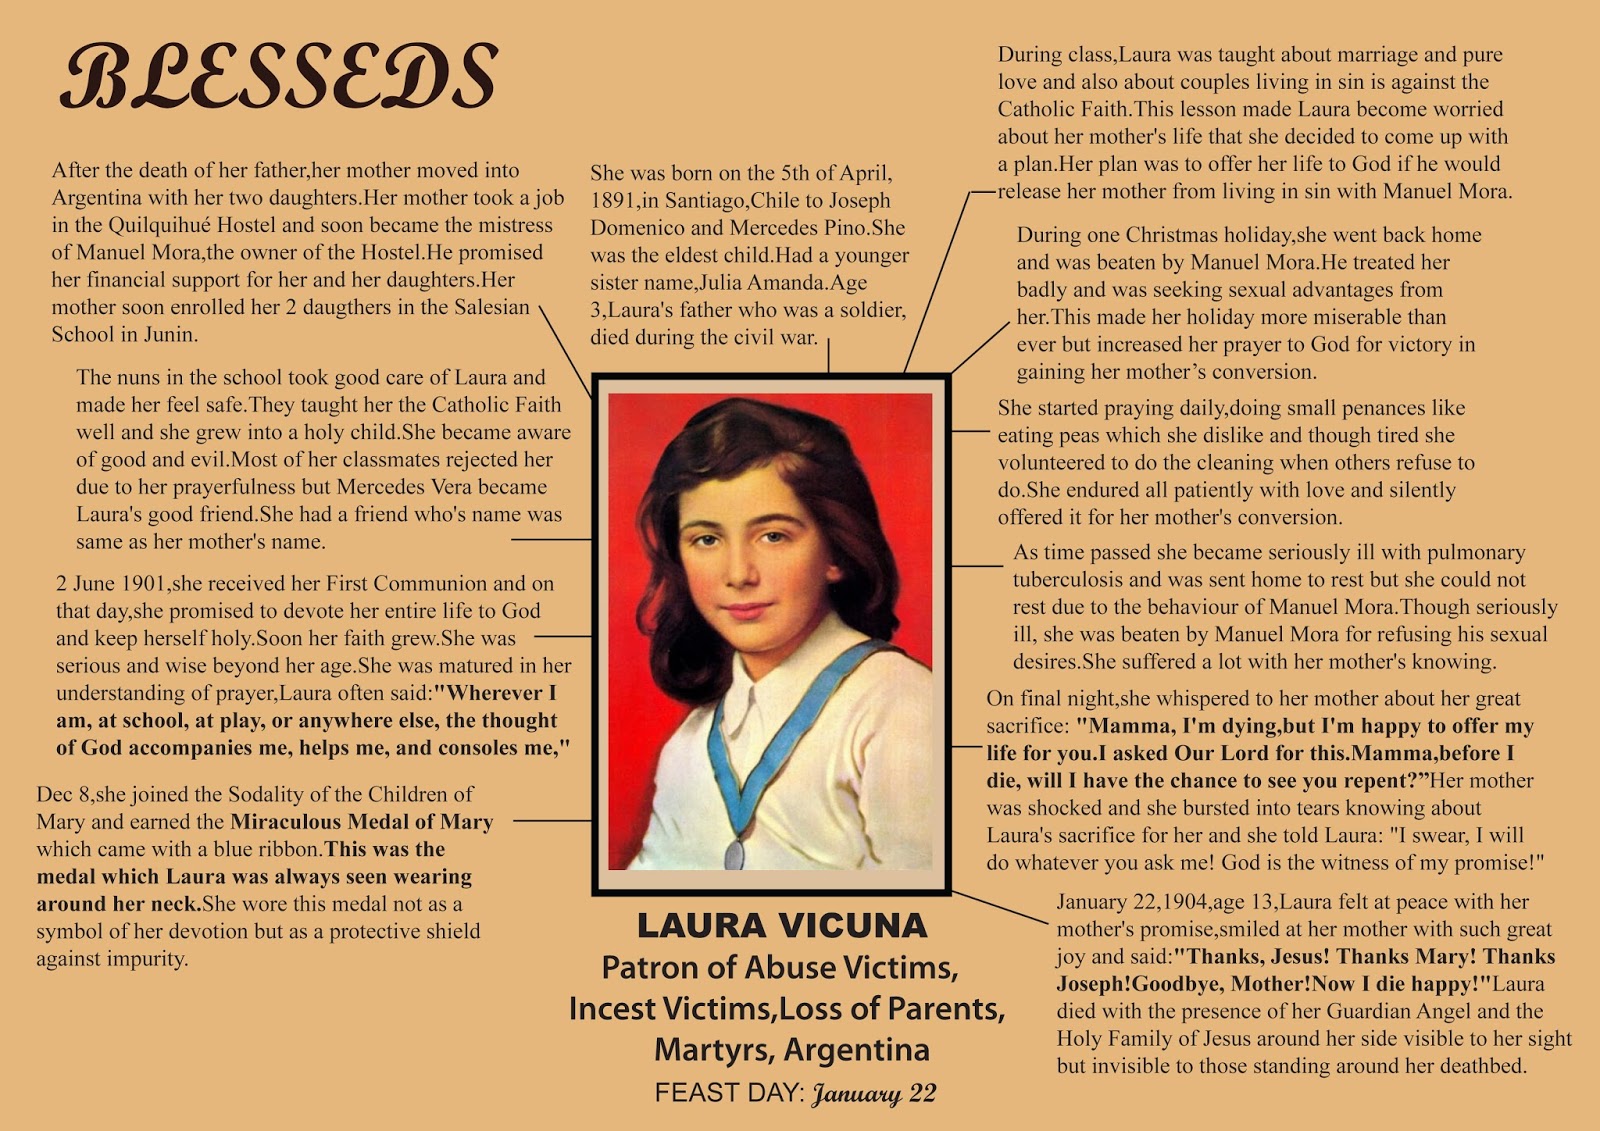 Imitating Christs Humility Feast of Blessed Laura Del Carmen Vicuna Pino.